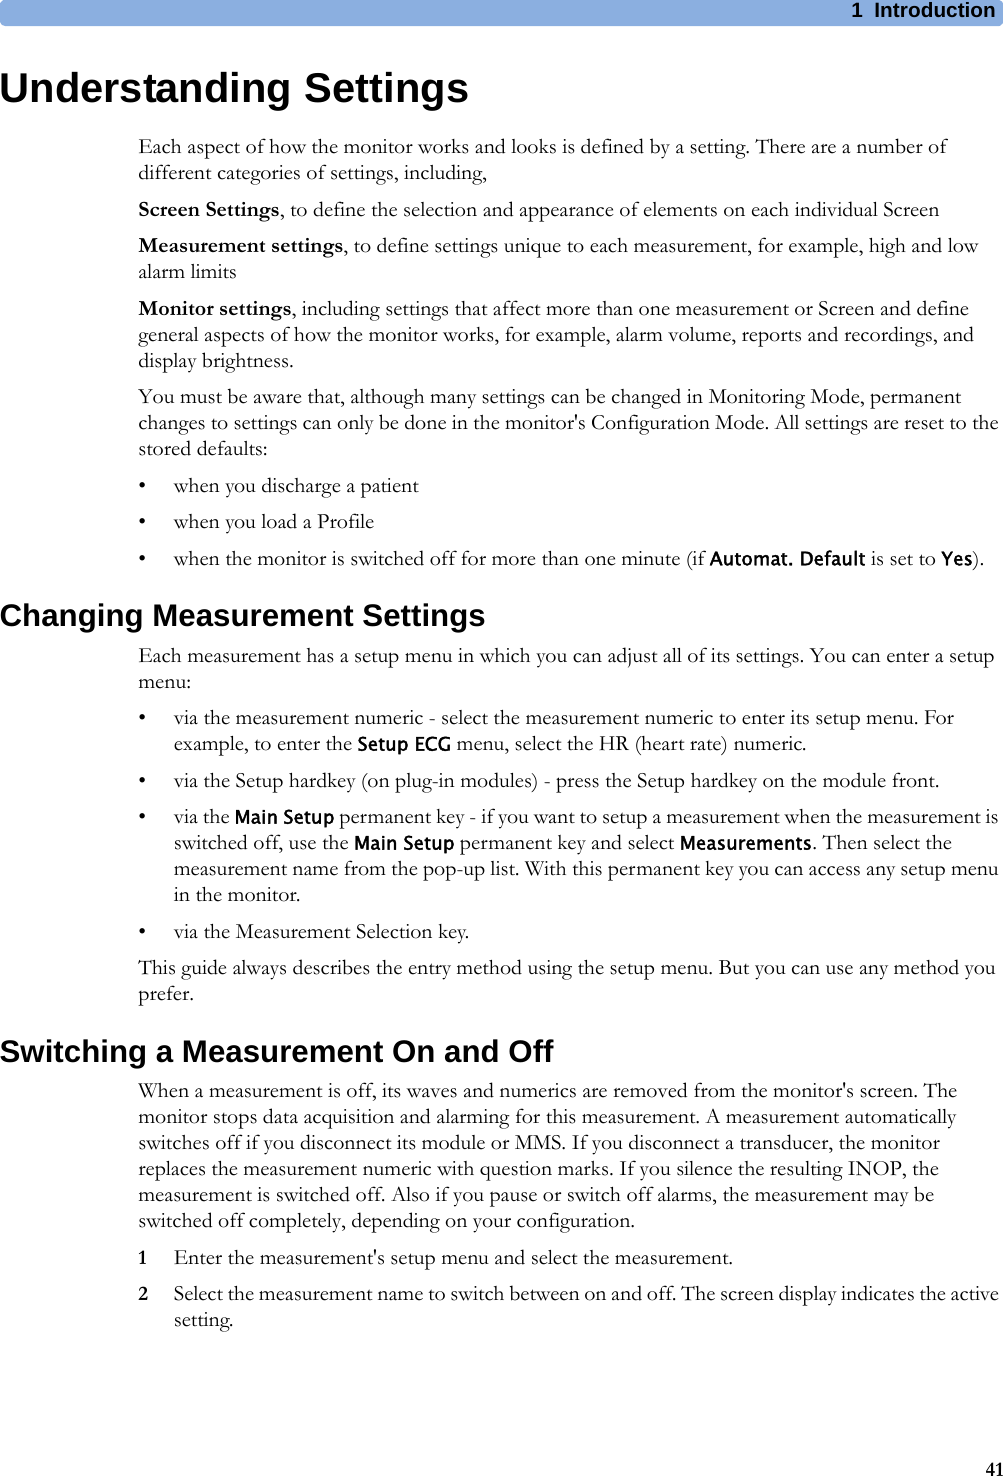 1 Introduction41Understanding SettingsEach aspect of how the monitor works and looks is defined by a setting. There are a number of different categories of settings, including,Screen Settings, to define the selection and appearance of elements on each individual ScreenMeasurement settings, to define settings unique to each measurement, for example, high and low alarm limitsMonitor settings, including settings that affect more than one measurement or Screen and define general aspects of how the monitor works, for example, alarm volume, reports and recordings, and display brightness.You must be aware that, although many settings can be changed in Monitoring Mode, permanent changes to settings can only be done in the monitor&apos;s Configuration Mode. All settings are reset to the stored defaults:• when you discharge a patient• when you load a Profile• when the monitor is switched off for more than one minute (if Automat. Default is set to Yes).Changing Measurement SettingsEach measurement has a setup menu in which you can adjust all of its settings. You can enter a setup menu:• via the measurement numeric - select the measurement numeric to enter its setup menu. For example, to enter the Setup ECG menu, select the HR (heart rate) numeric.• via the Setup hardkey (on plug-in modules) - press the Setup hardkey on the module front.•via the Main Setup permanent key - if you want to setup a measurement when the measurement is switched off, use the Main Setup permanent key and select Measurements. Then select the measurement name from the pop-up list. With this permanent key you can access any setup menu in the monitor.• via the Measurement Selection key.This guide always describes the entry method using the setup menu. But you can use any method you prefer.Switching a Measurement On and OffWhen a measurement is off, its waves and numerics are removed from the monitor&apos;s screen. The monitor stops data acquisition and alarming for this measurement. A measurement automatically switches off if you disconnect its module or MMS. If you disconnect a transducer, the monitor replaces the measurement numeric with question marks. If you silence the resulting INOP, the measurement is switched off. Also if you pause or switch off alarms, the measurement may be switched off completely, depending on your configuration.1Enter the measurement&apos;s setup menu and select the measurement.2Select the measurement name to switch between on and off. The screen display indicates the active setting.